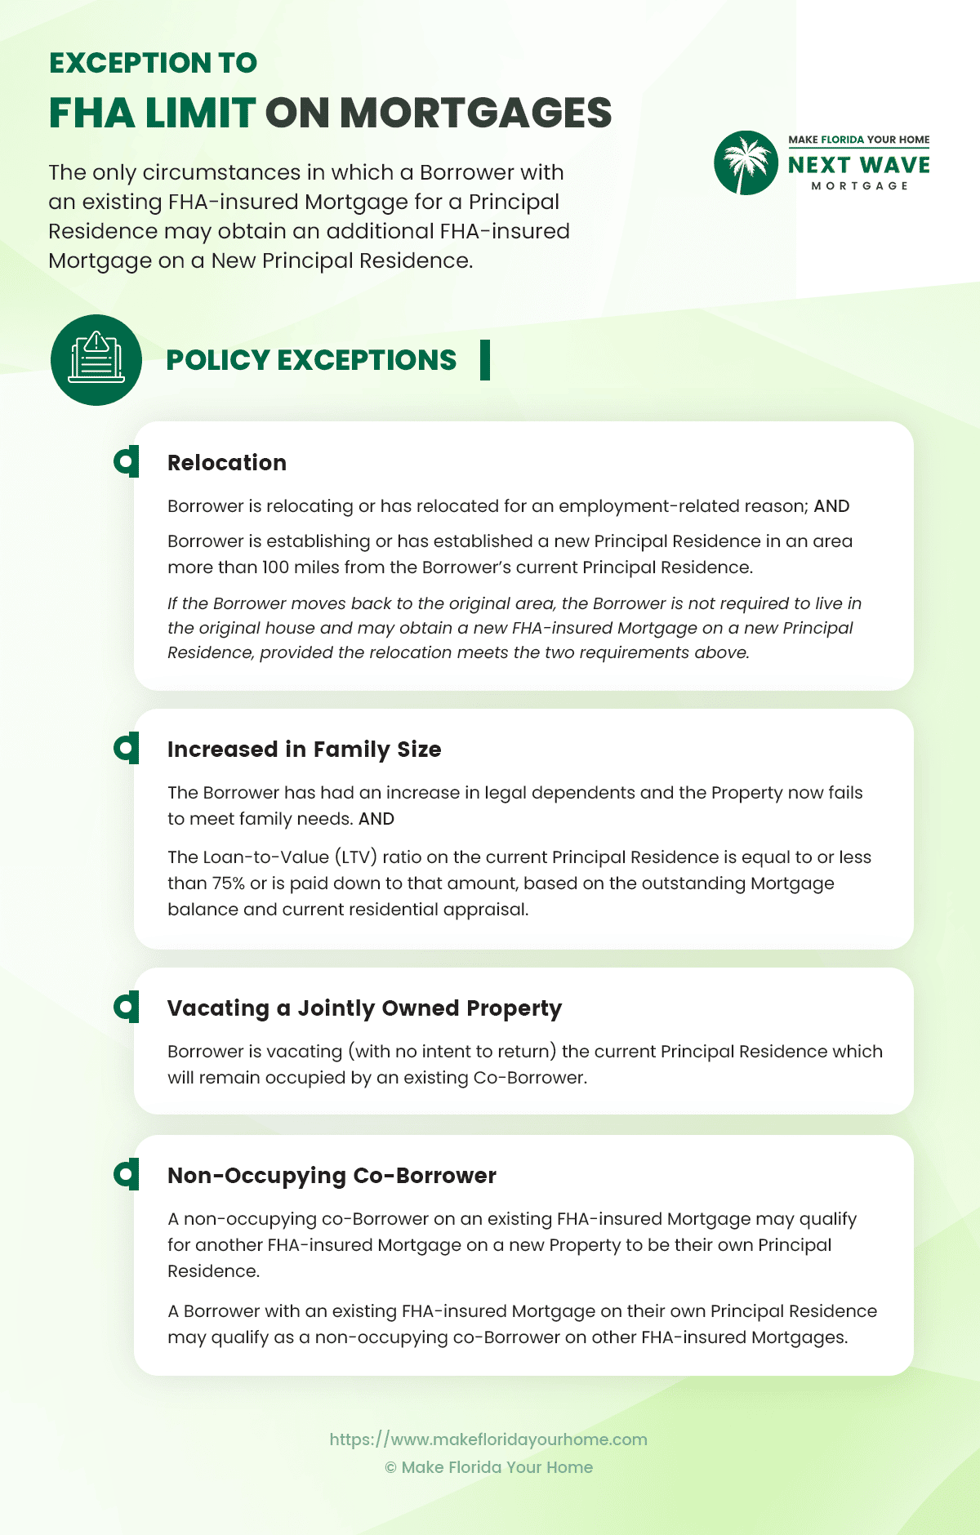 Exception to FHA Limit on Mortgages - Infographic